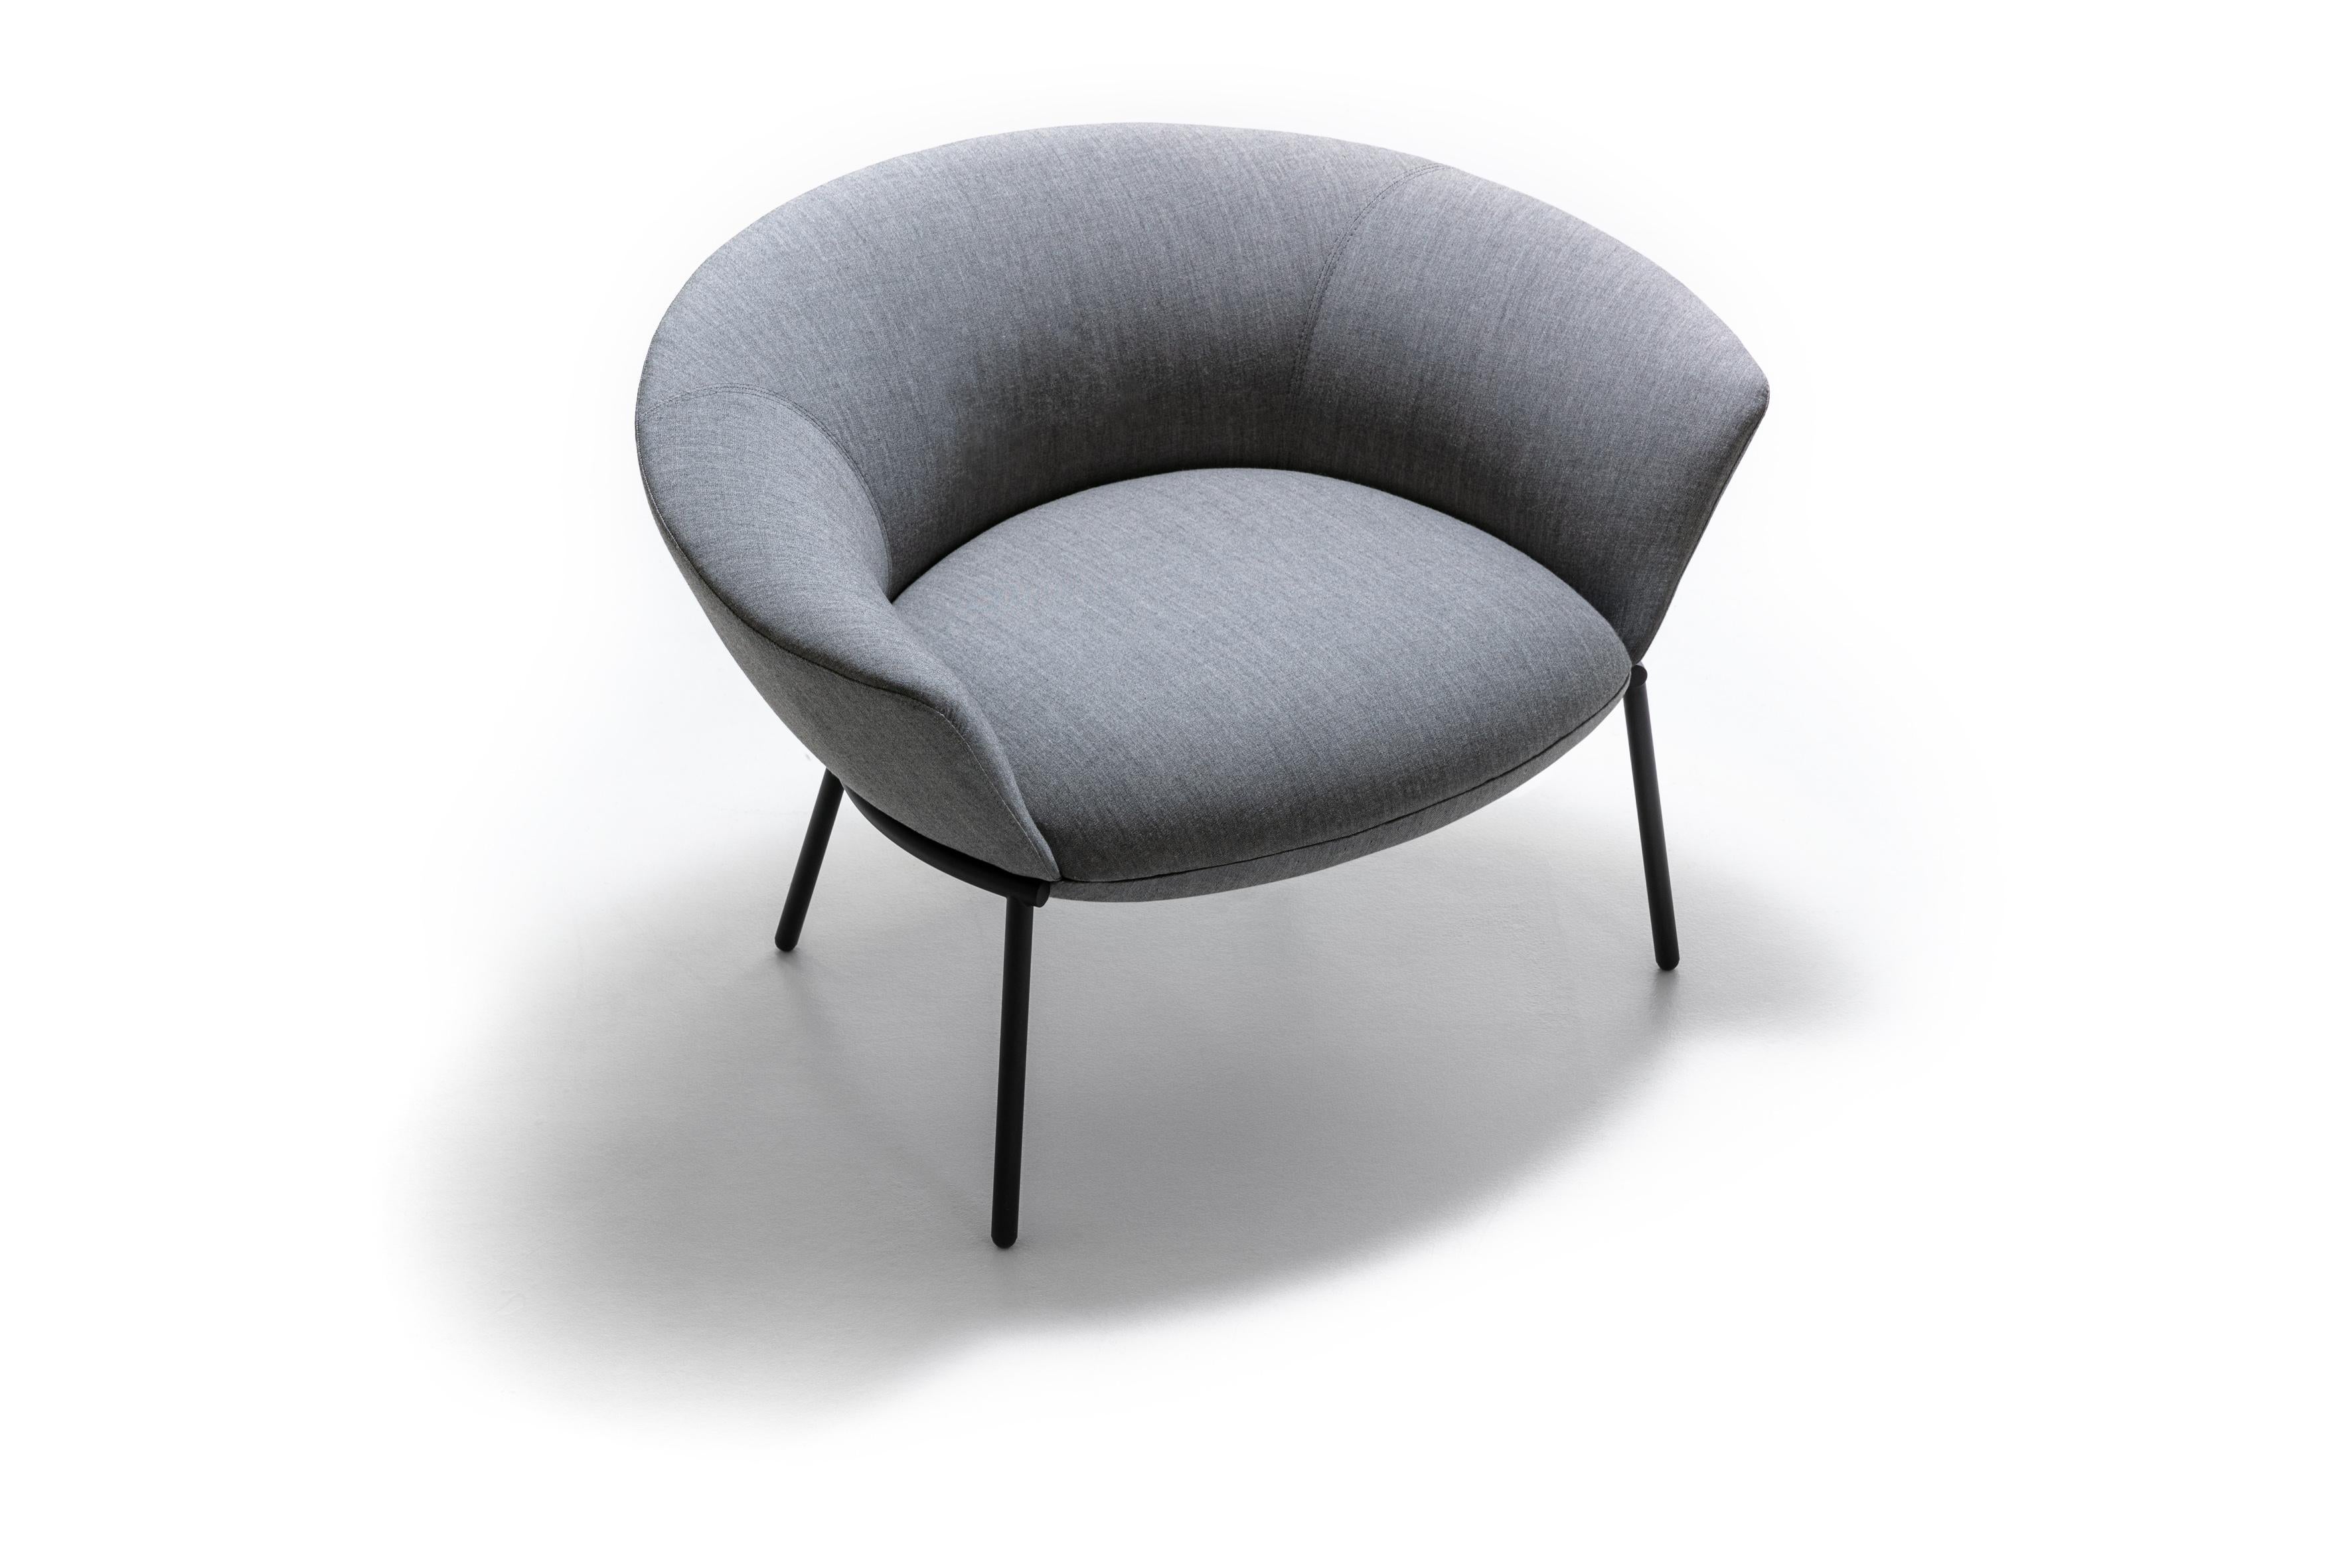 Thanks to an abundant and generous structure, the Swale armchair evokes relaxed conversation scenarios for residential and contract environments. The comfort of the seating is given by its large and enveloping shapes, expertly reproduced in the seat